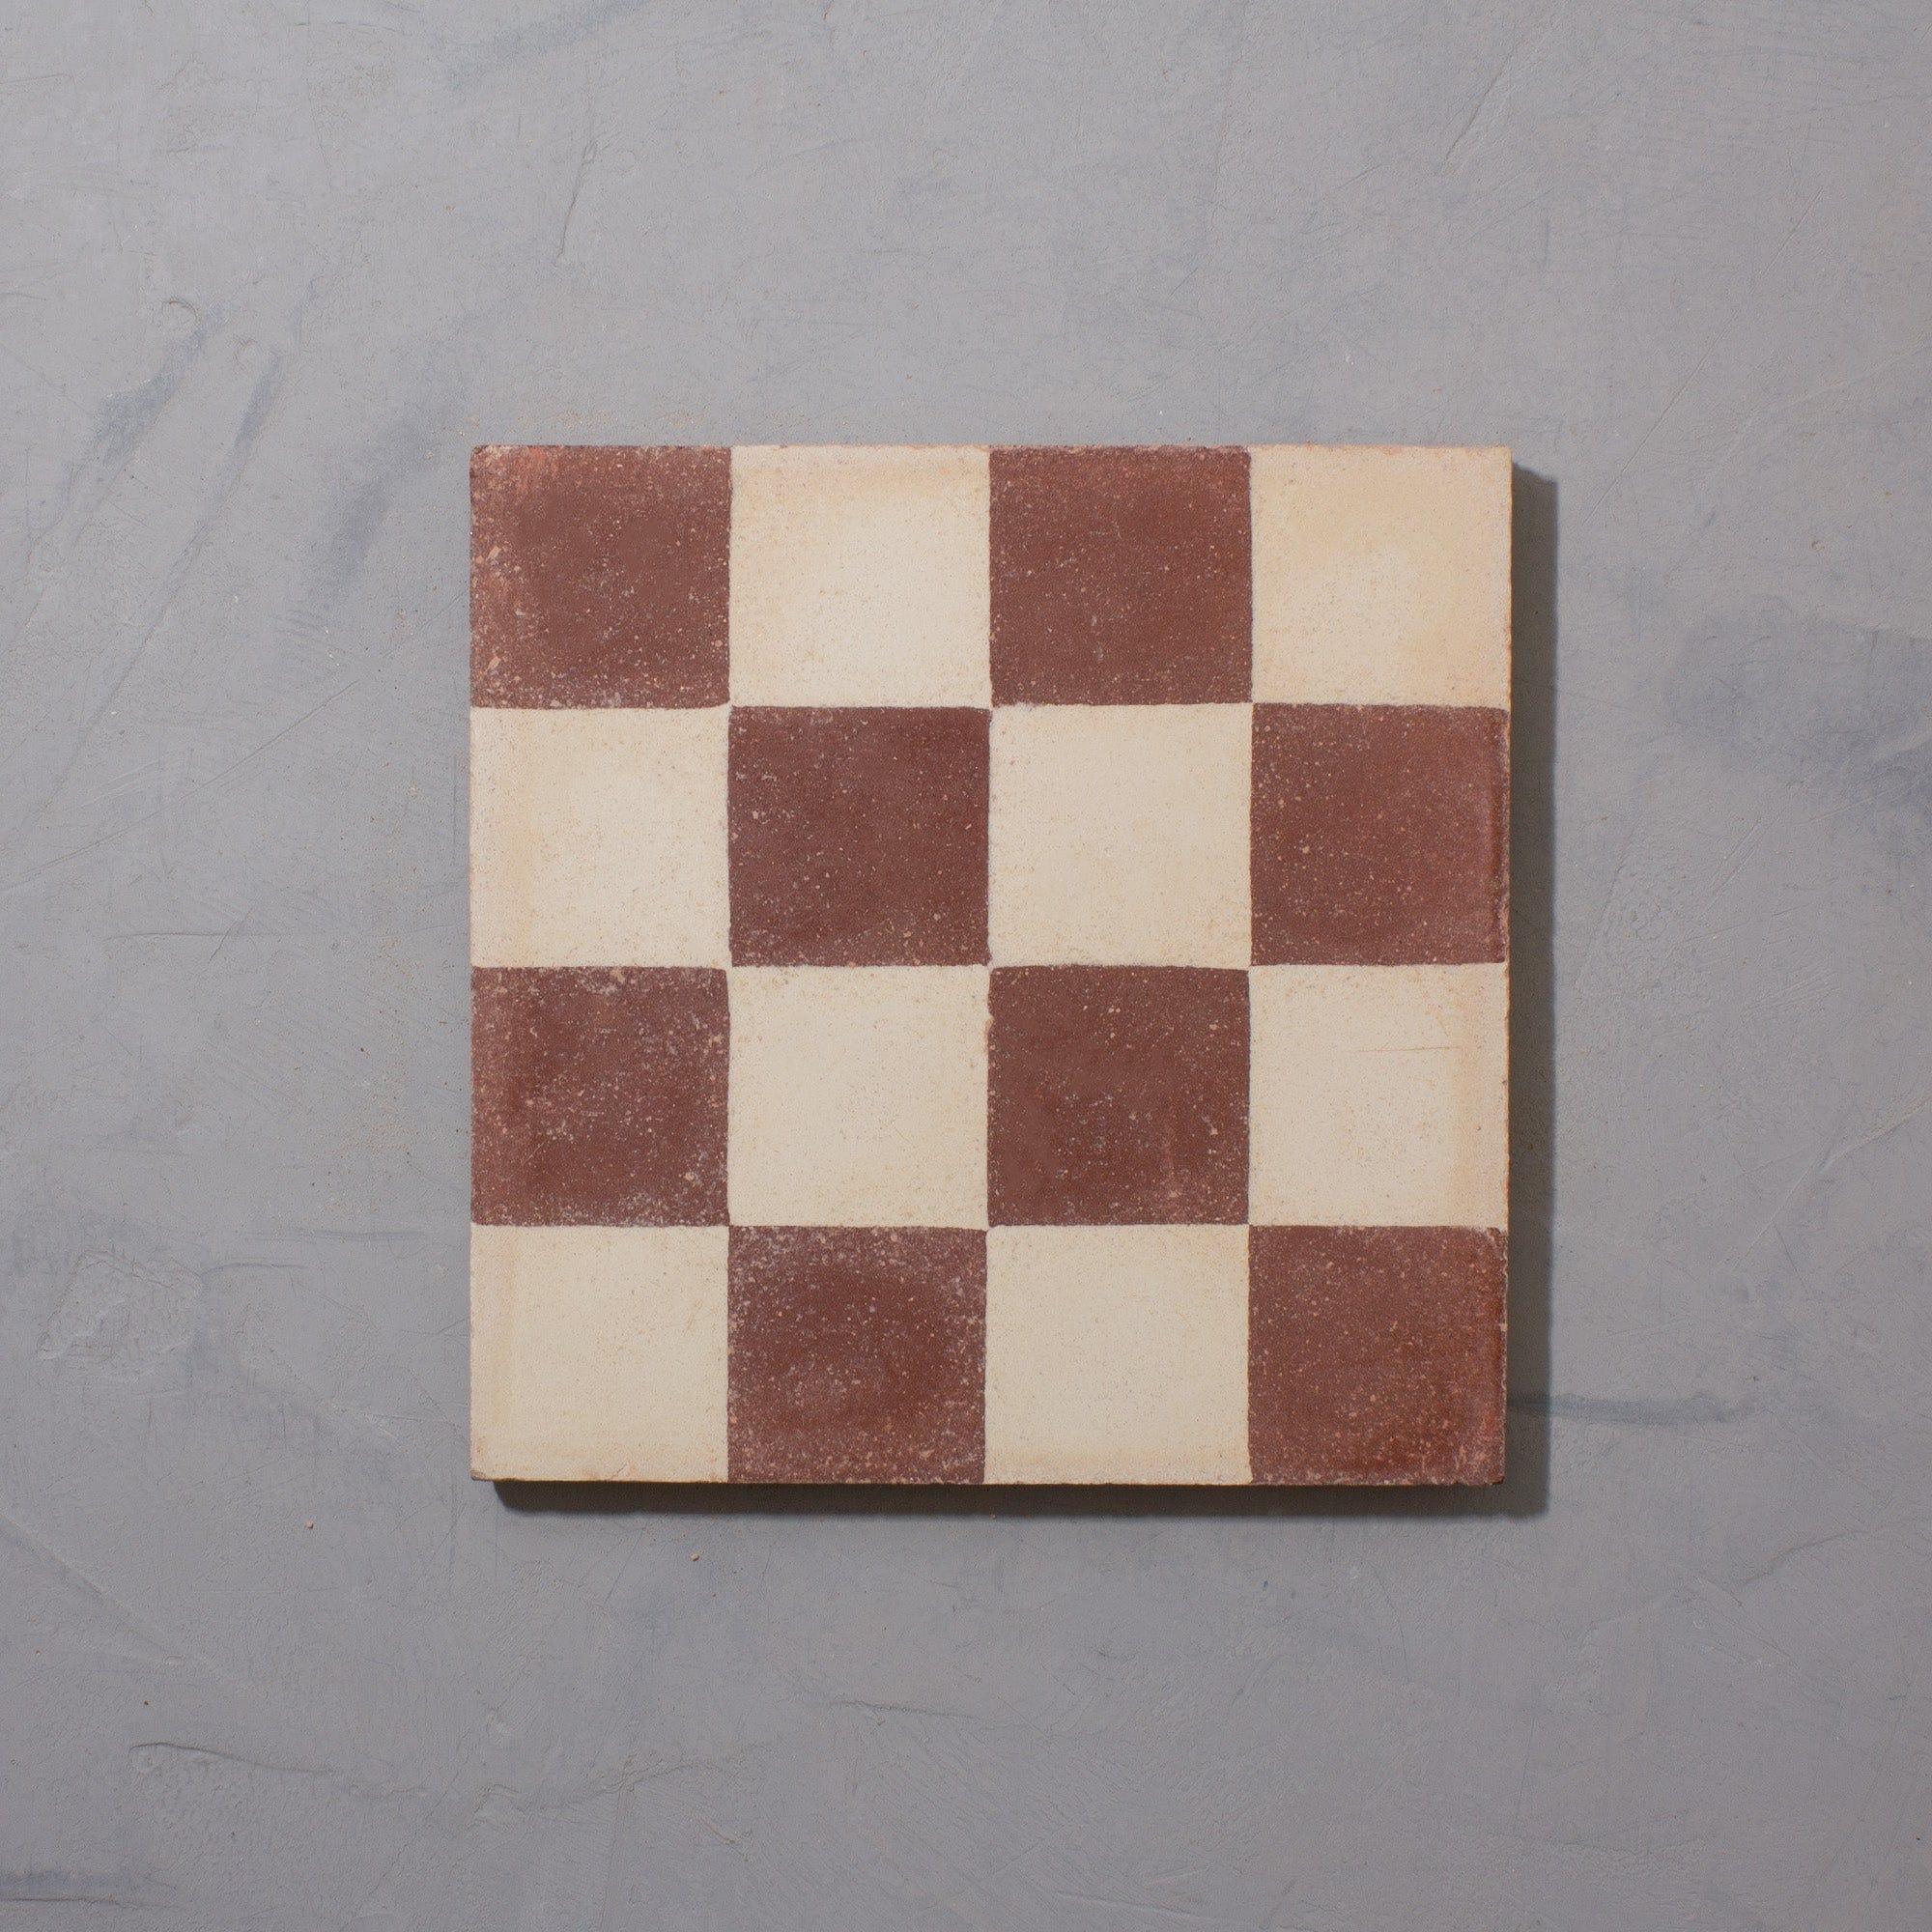 Spanish Bert & May - Chequerboard Reclaimed Tiles 8m2 Lot (86sqft) For Sale